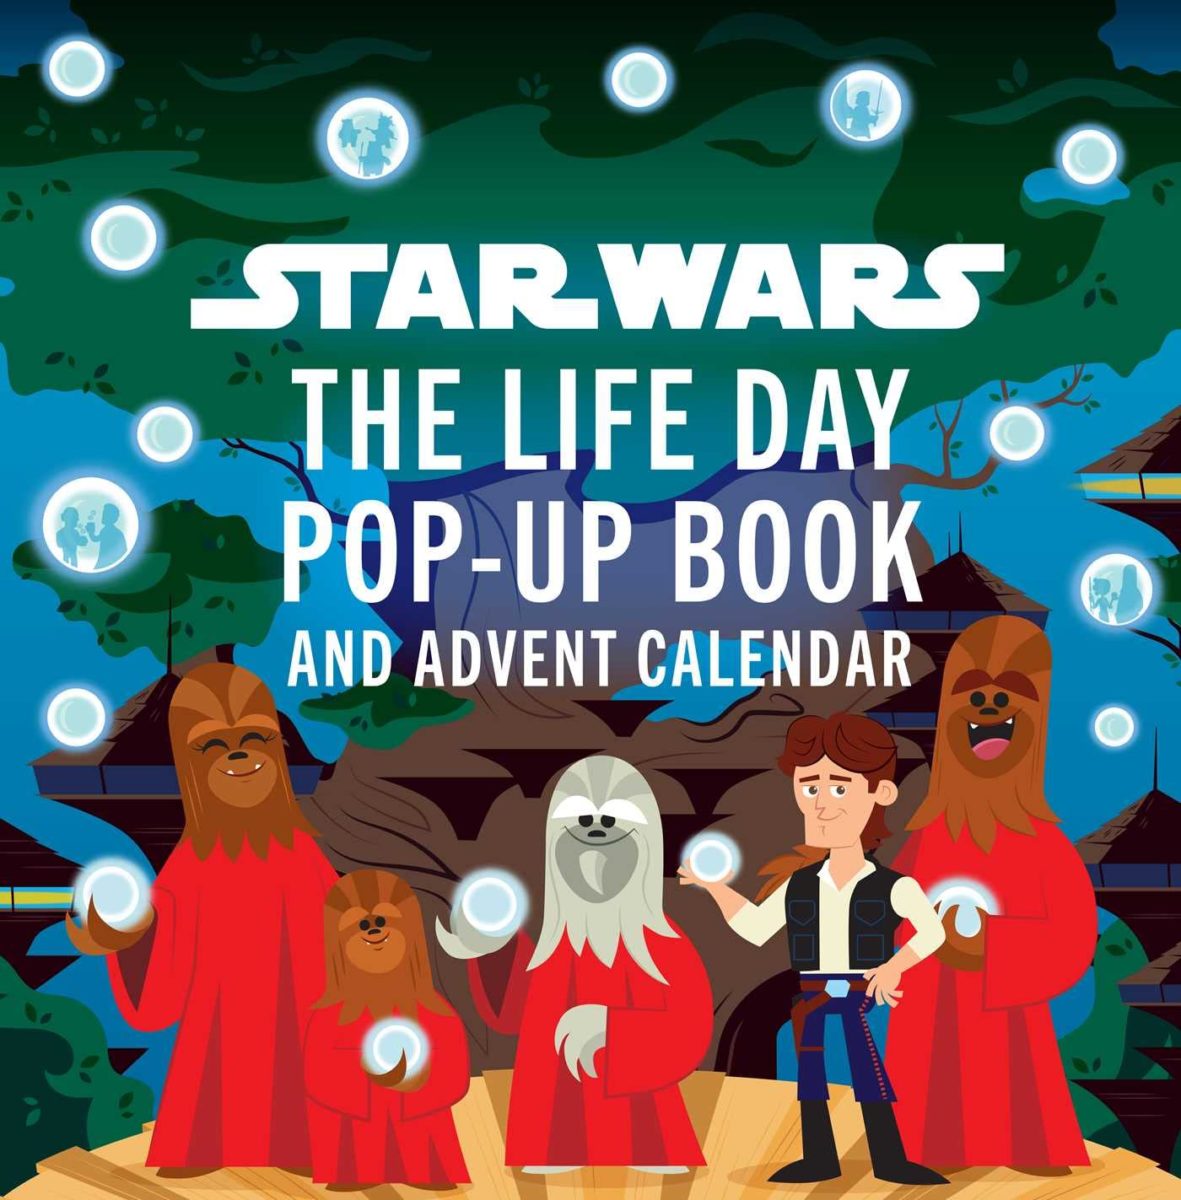 'Star Wars The Life Day PopUp Book and Advent Calendar' Now Available